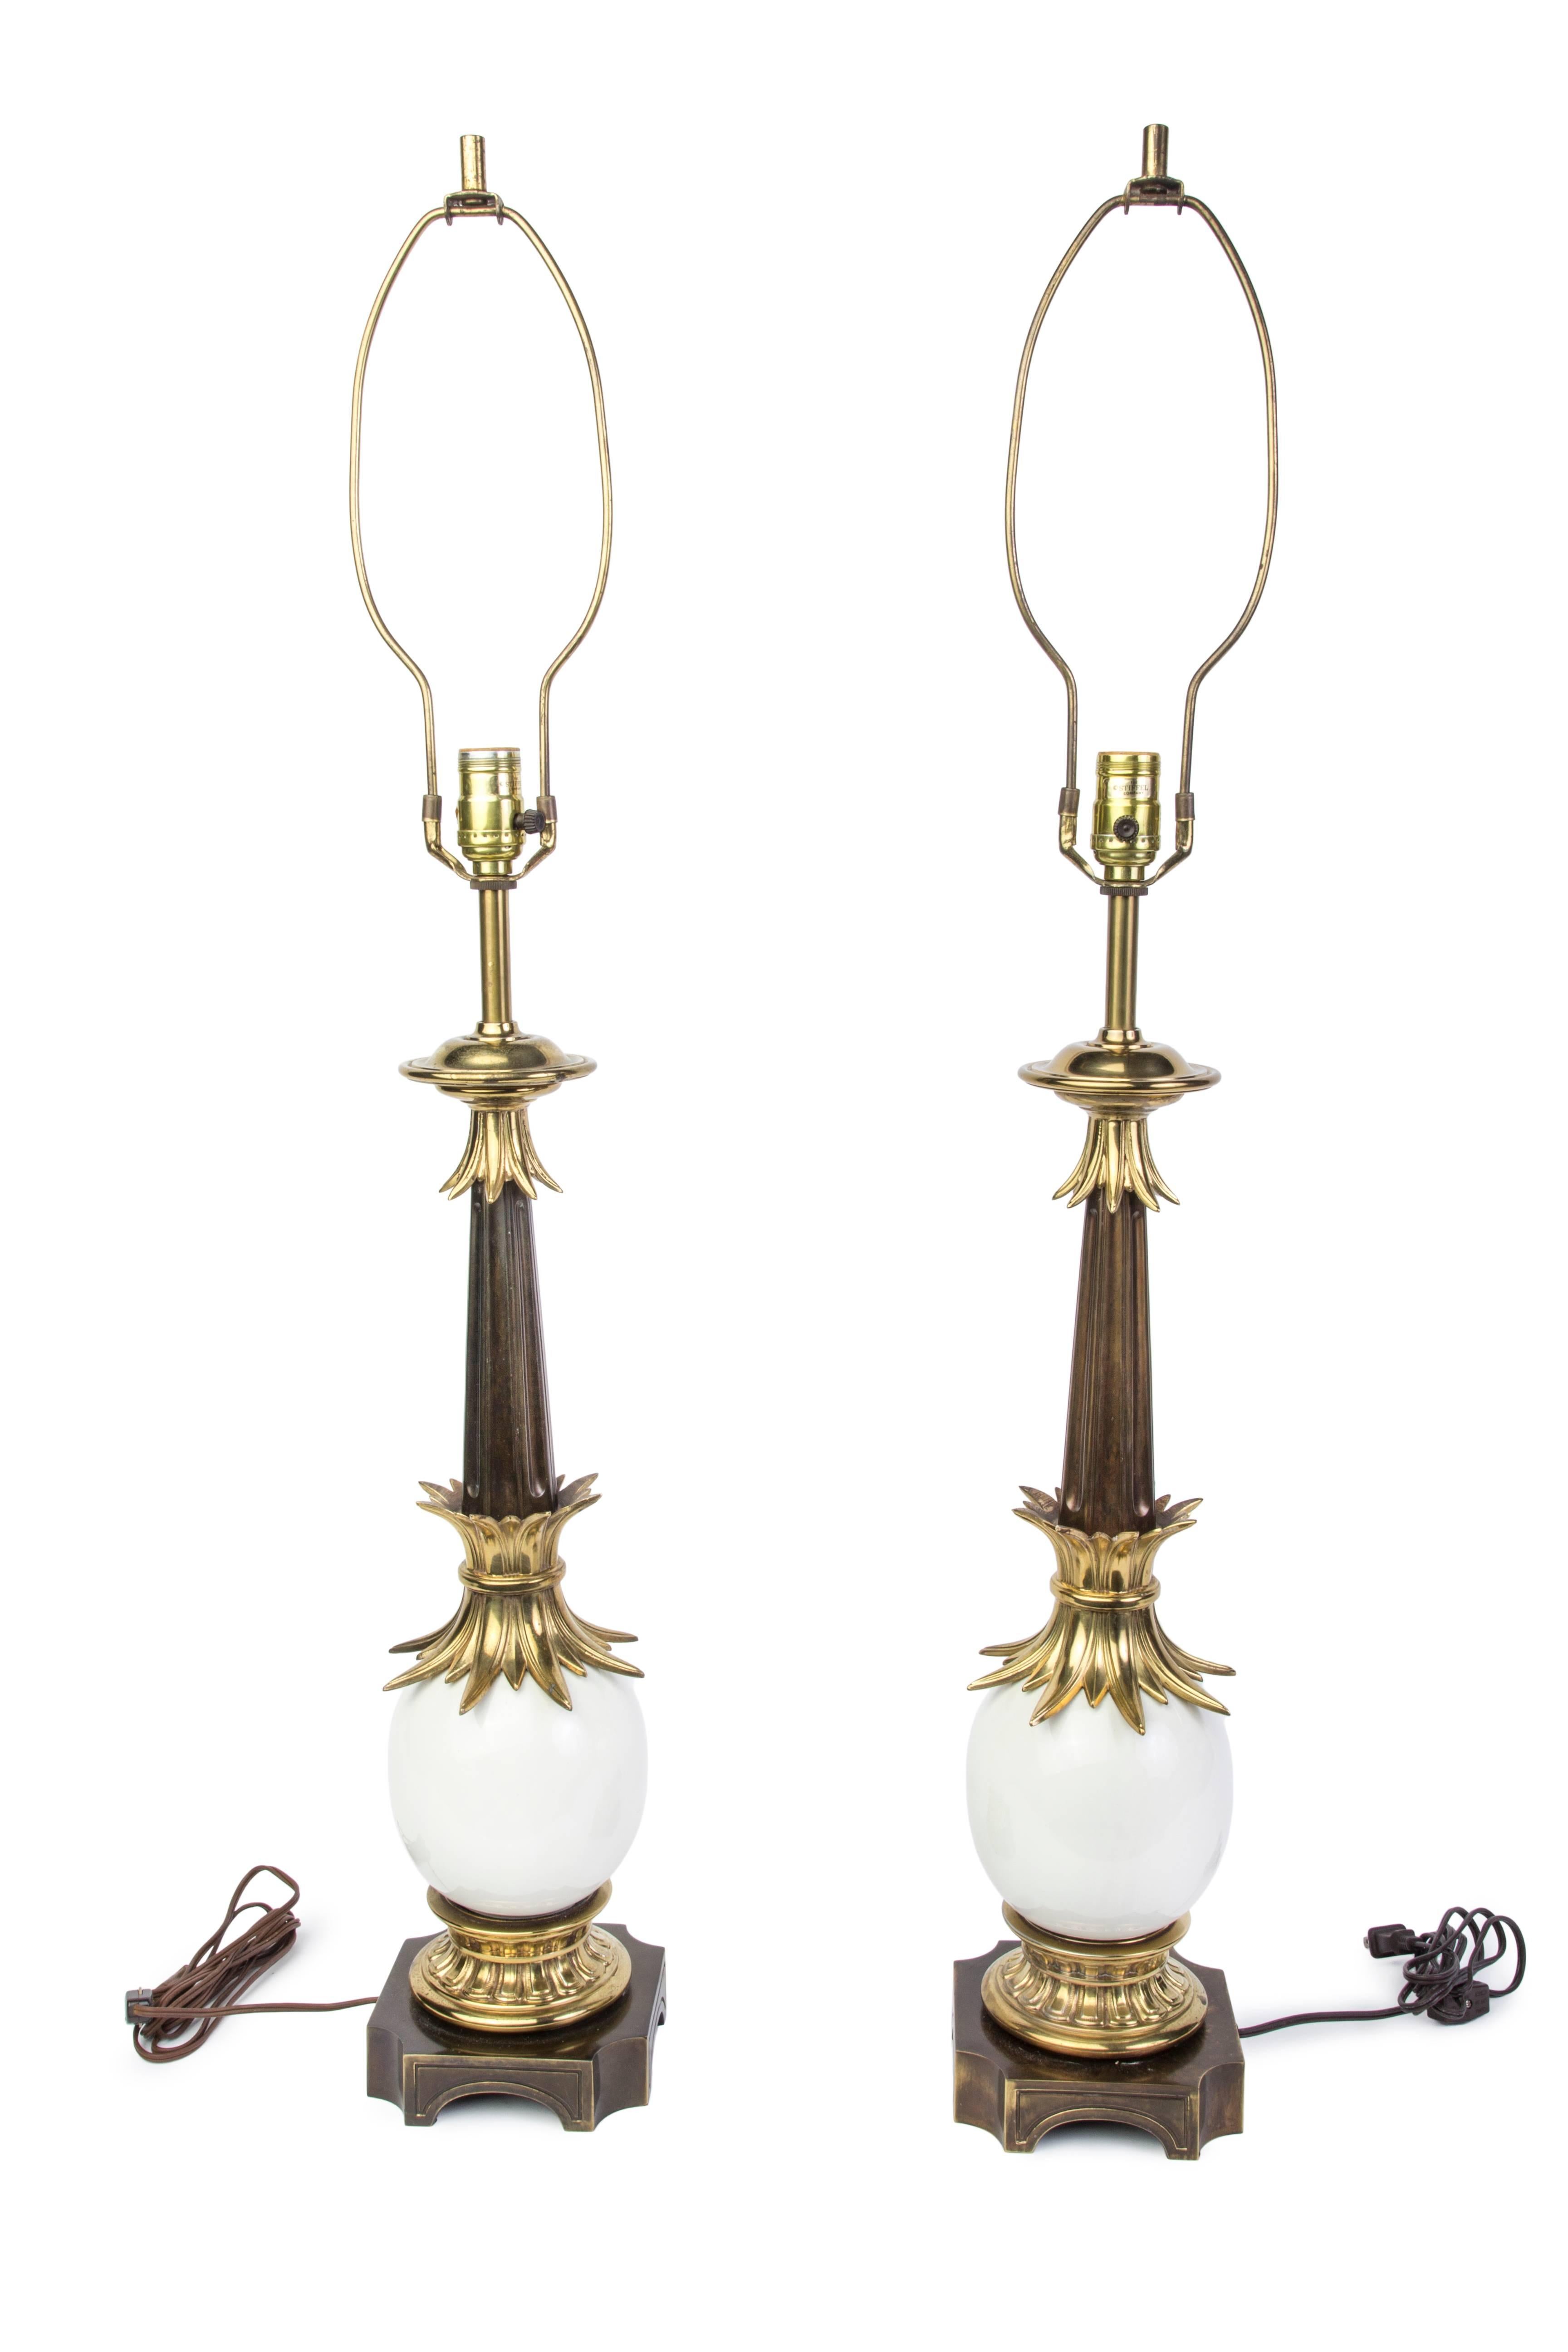 Pair of Hollywood Regency brass and ostrich eggshell lamps by Stiffel.

Made in America, circa 1960

Measures: 39